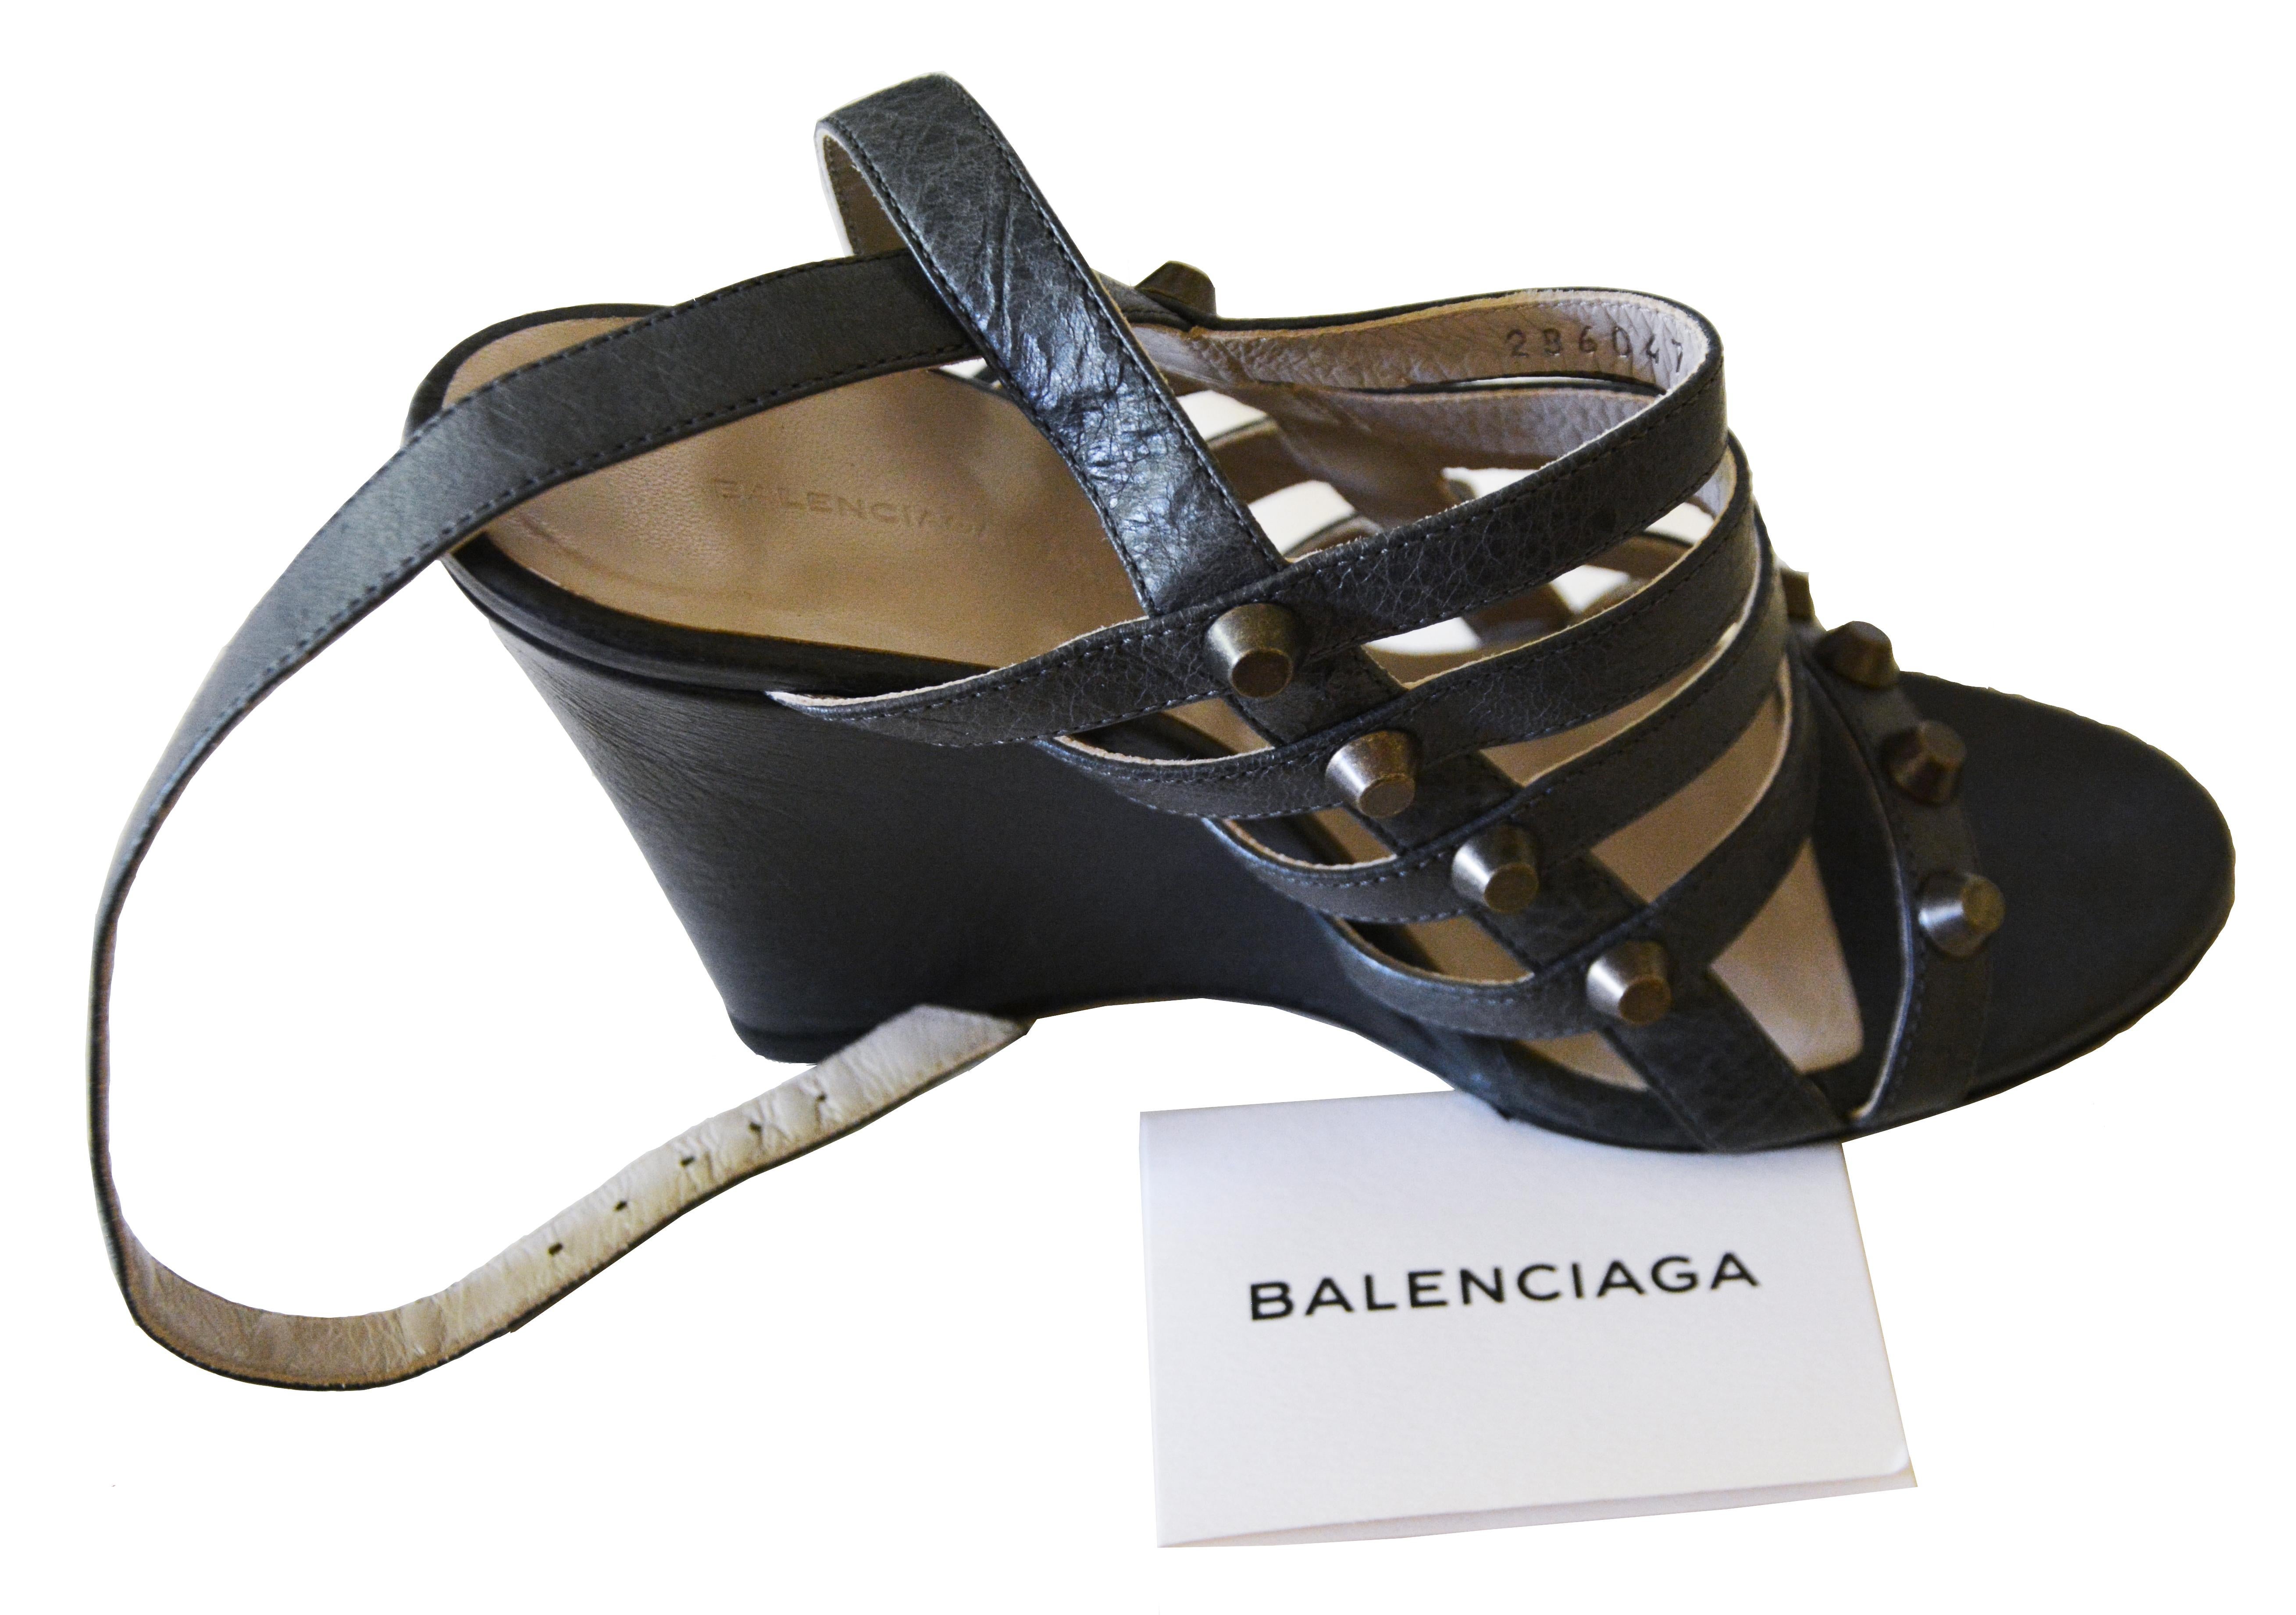 BALENCIAGA CAGE STUDDED WEDGES
2000s
Grade condition A
Charcoal grey leather and studs
Heels 9cm 
Size 37 IT
